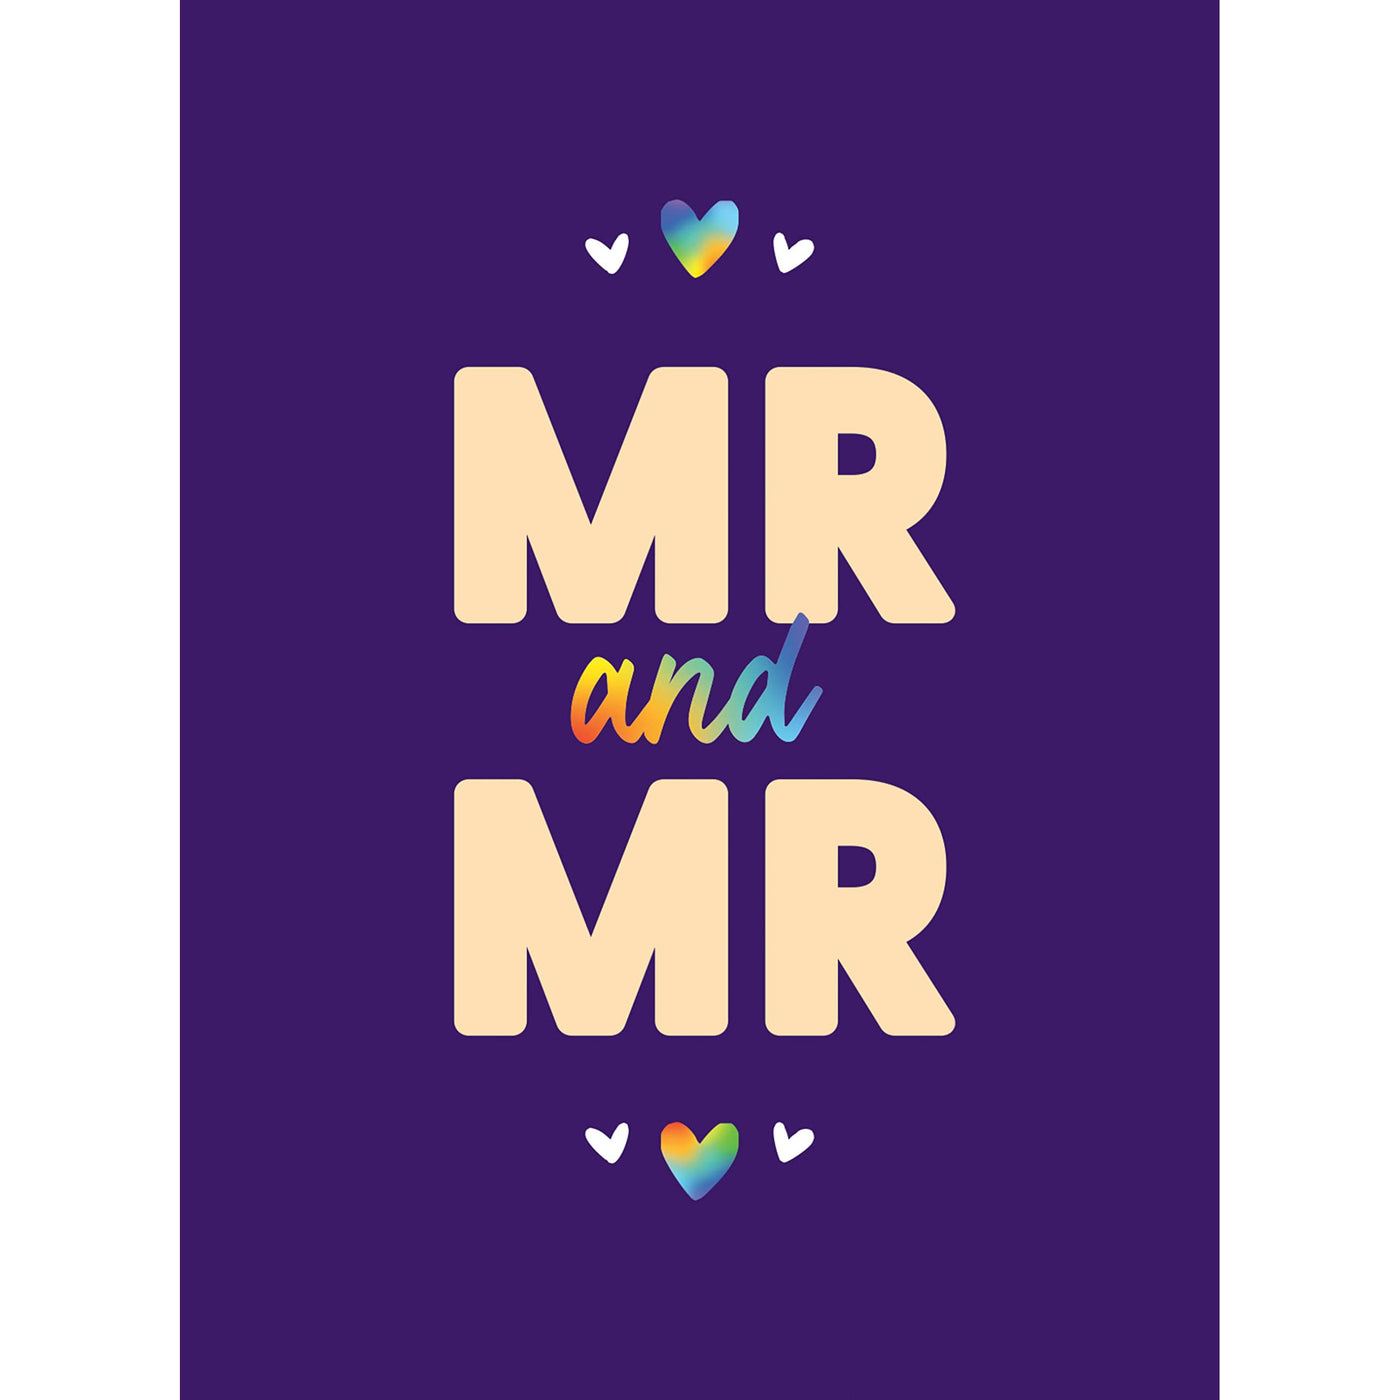 Mr & Mr: Romantic Quotes and Affirmations to say “I Love You” To Your Partner